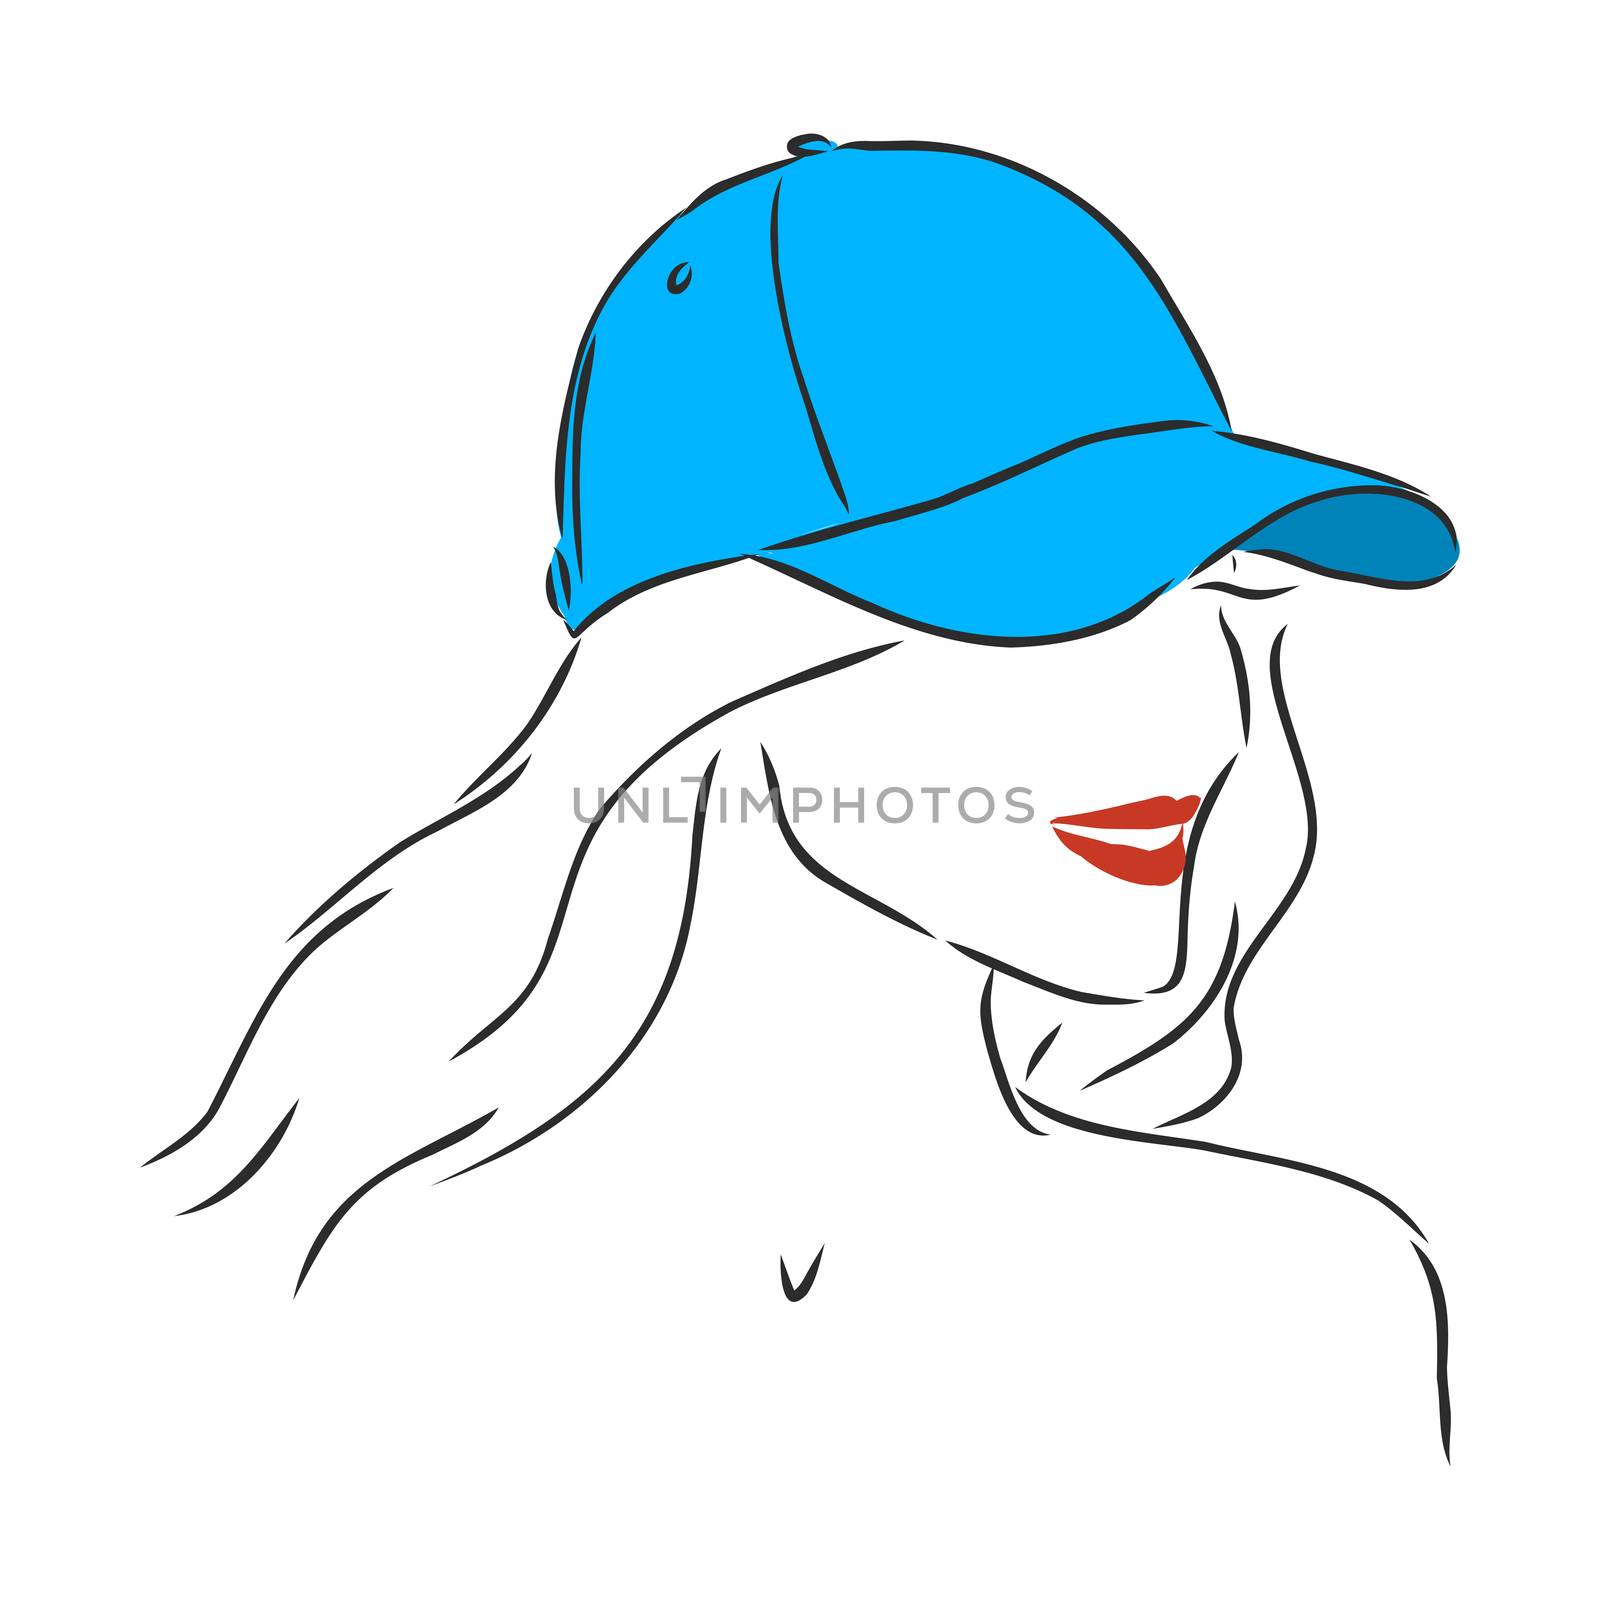 Isolated vector illustration. Pretty girl in a cap. Closeup female portrait. Hand drawn linear doodle sketch. Black silhouette on white background. beautiful girl in a cap, vector sketch illustration by ekaterina